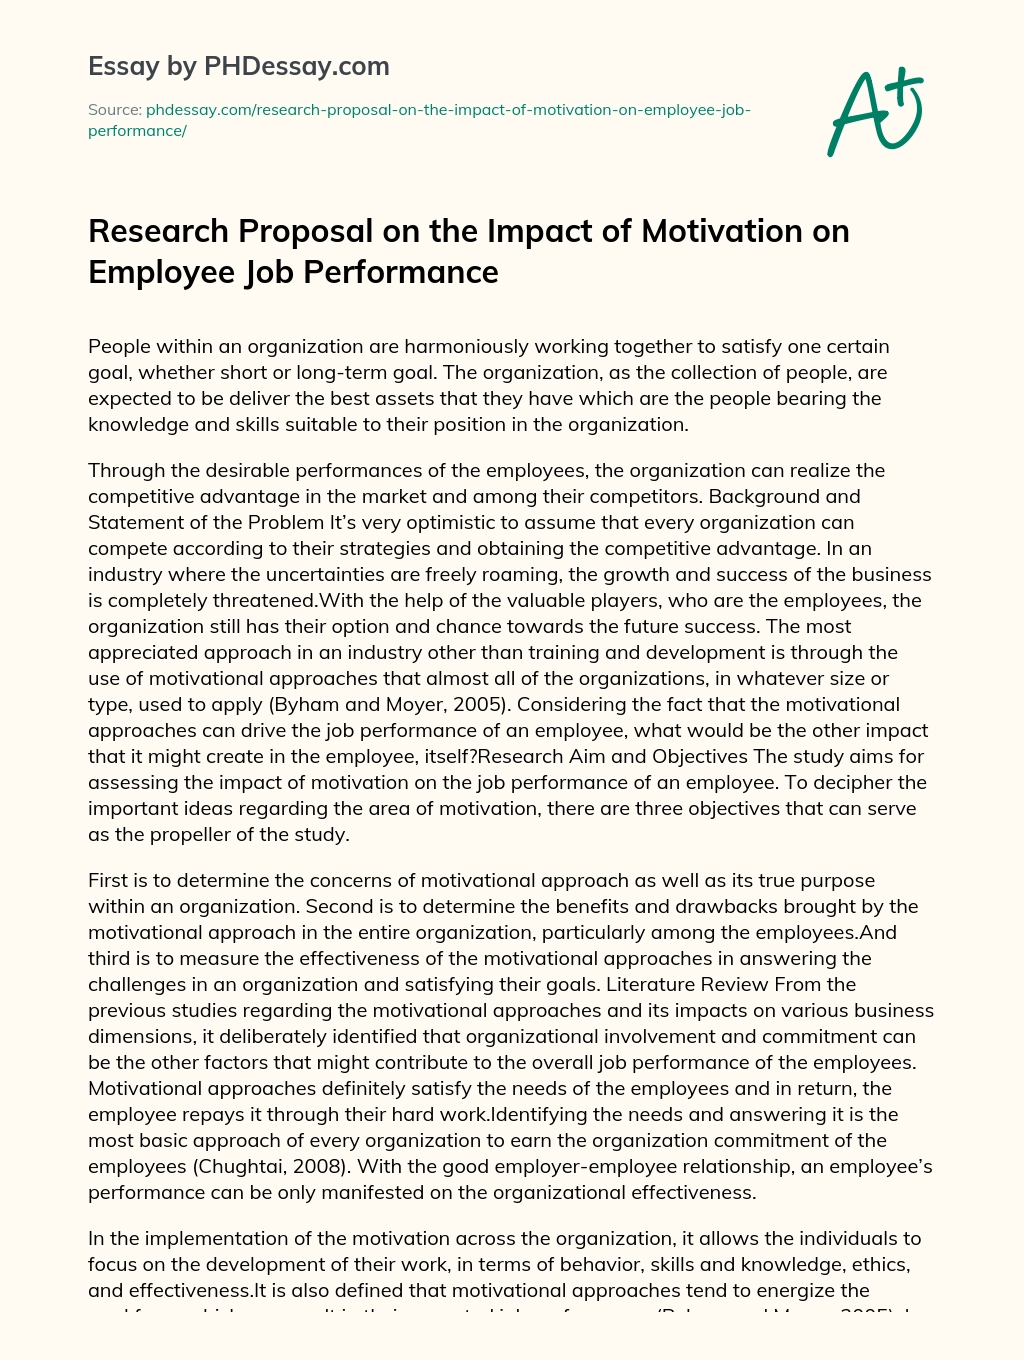 Research Proposal on the Impact of Motivation on Employee Job Performance essay